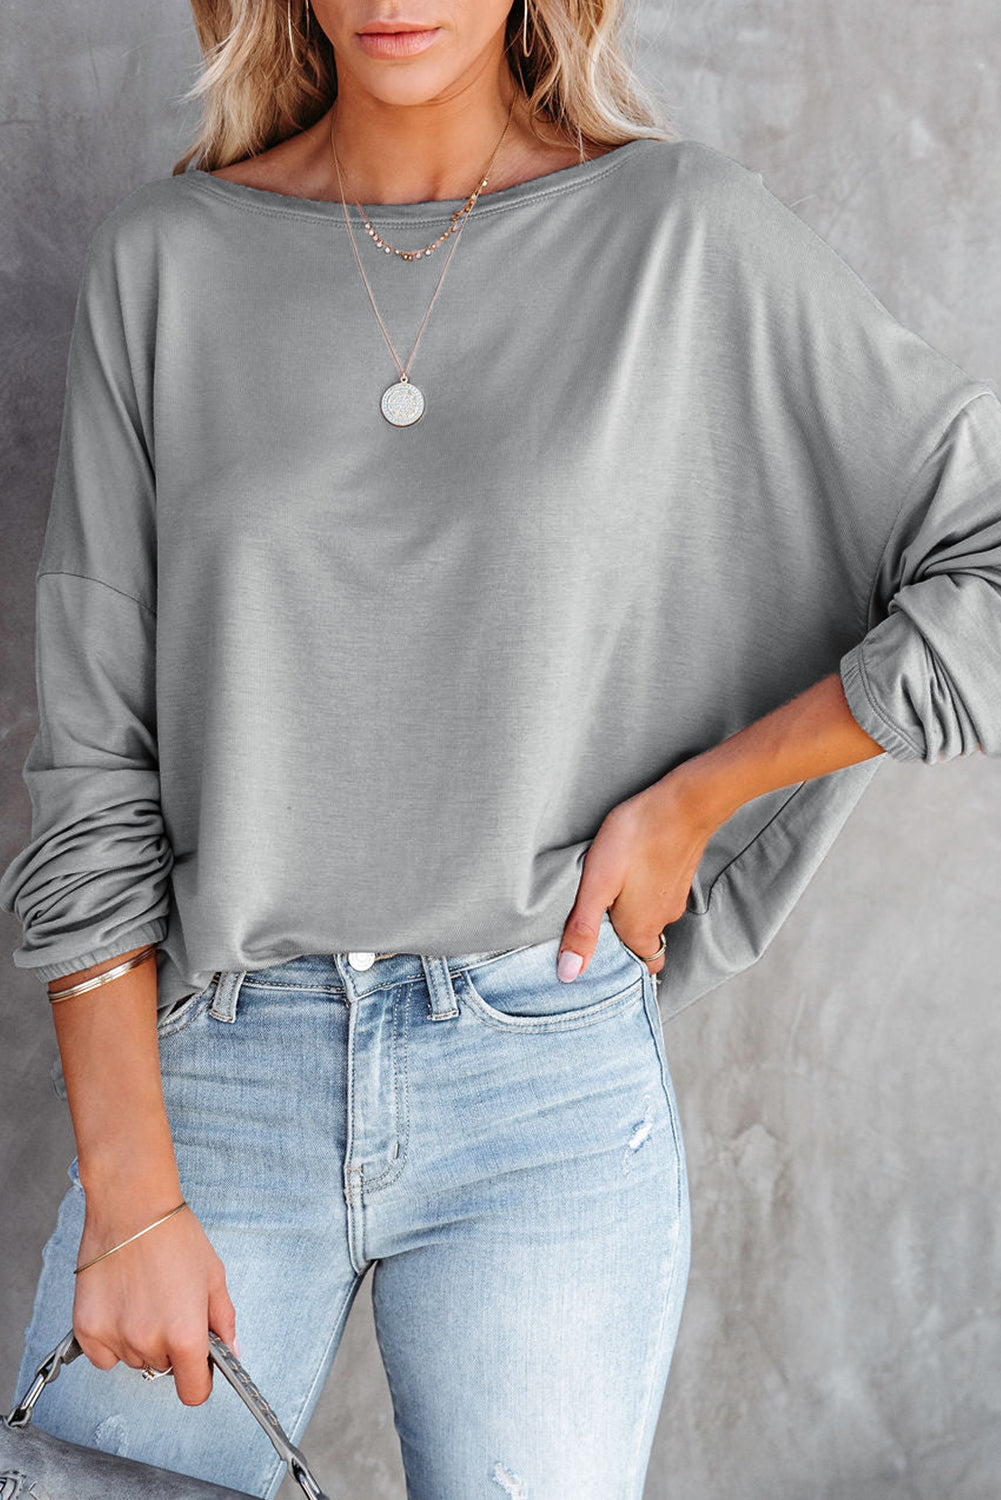 Gray Loose Fit Wide Neck Batwing Sleeves Top Gray 75%Polyester+20%Cotton+5%Elastane Long Sleeve Tops JT's Designer Fashion